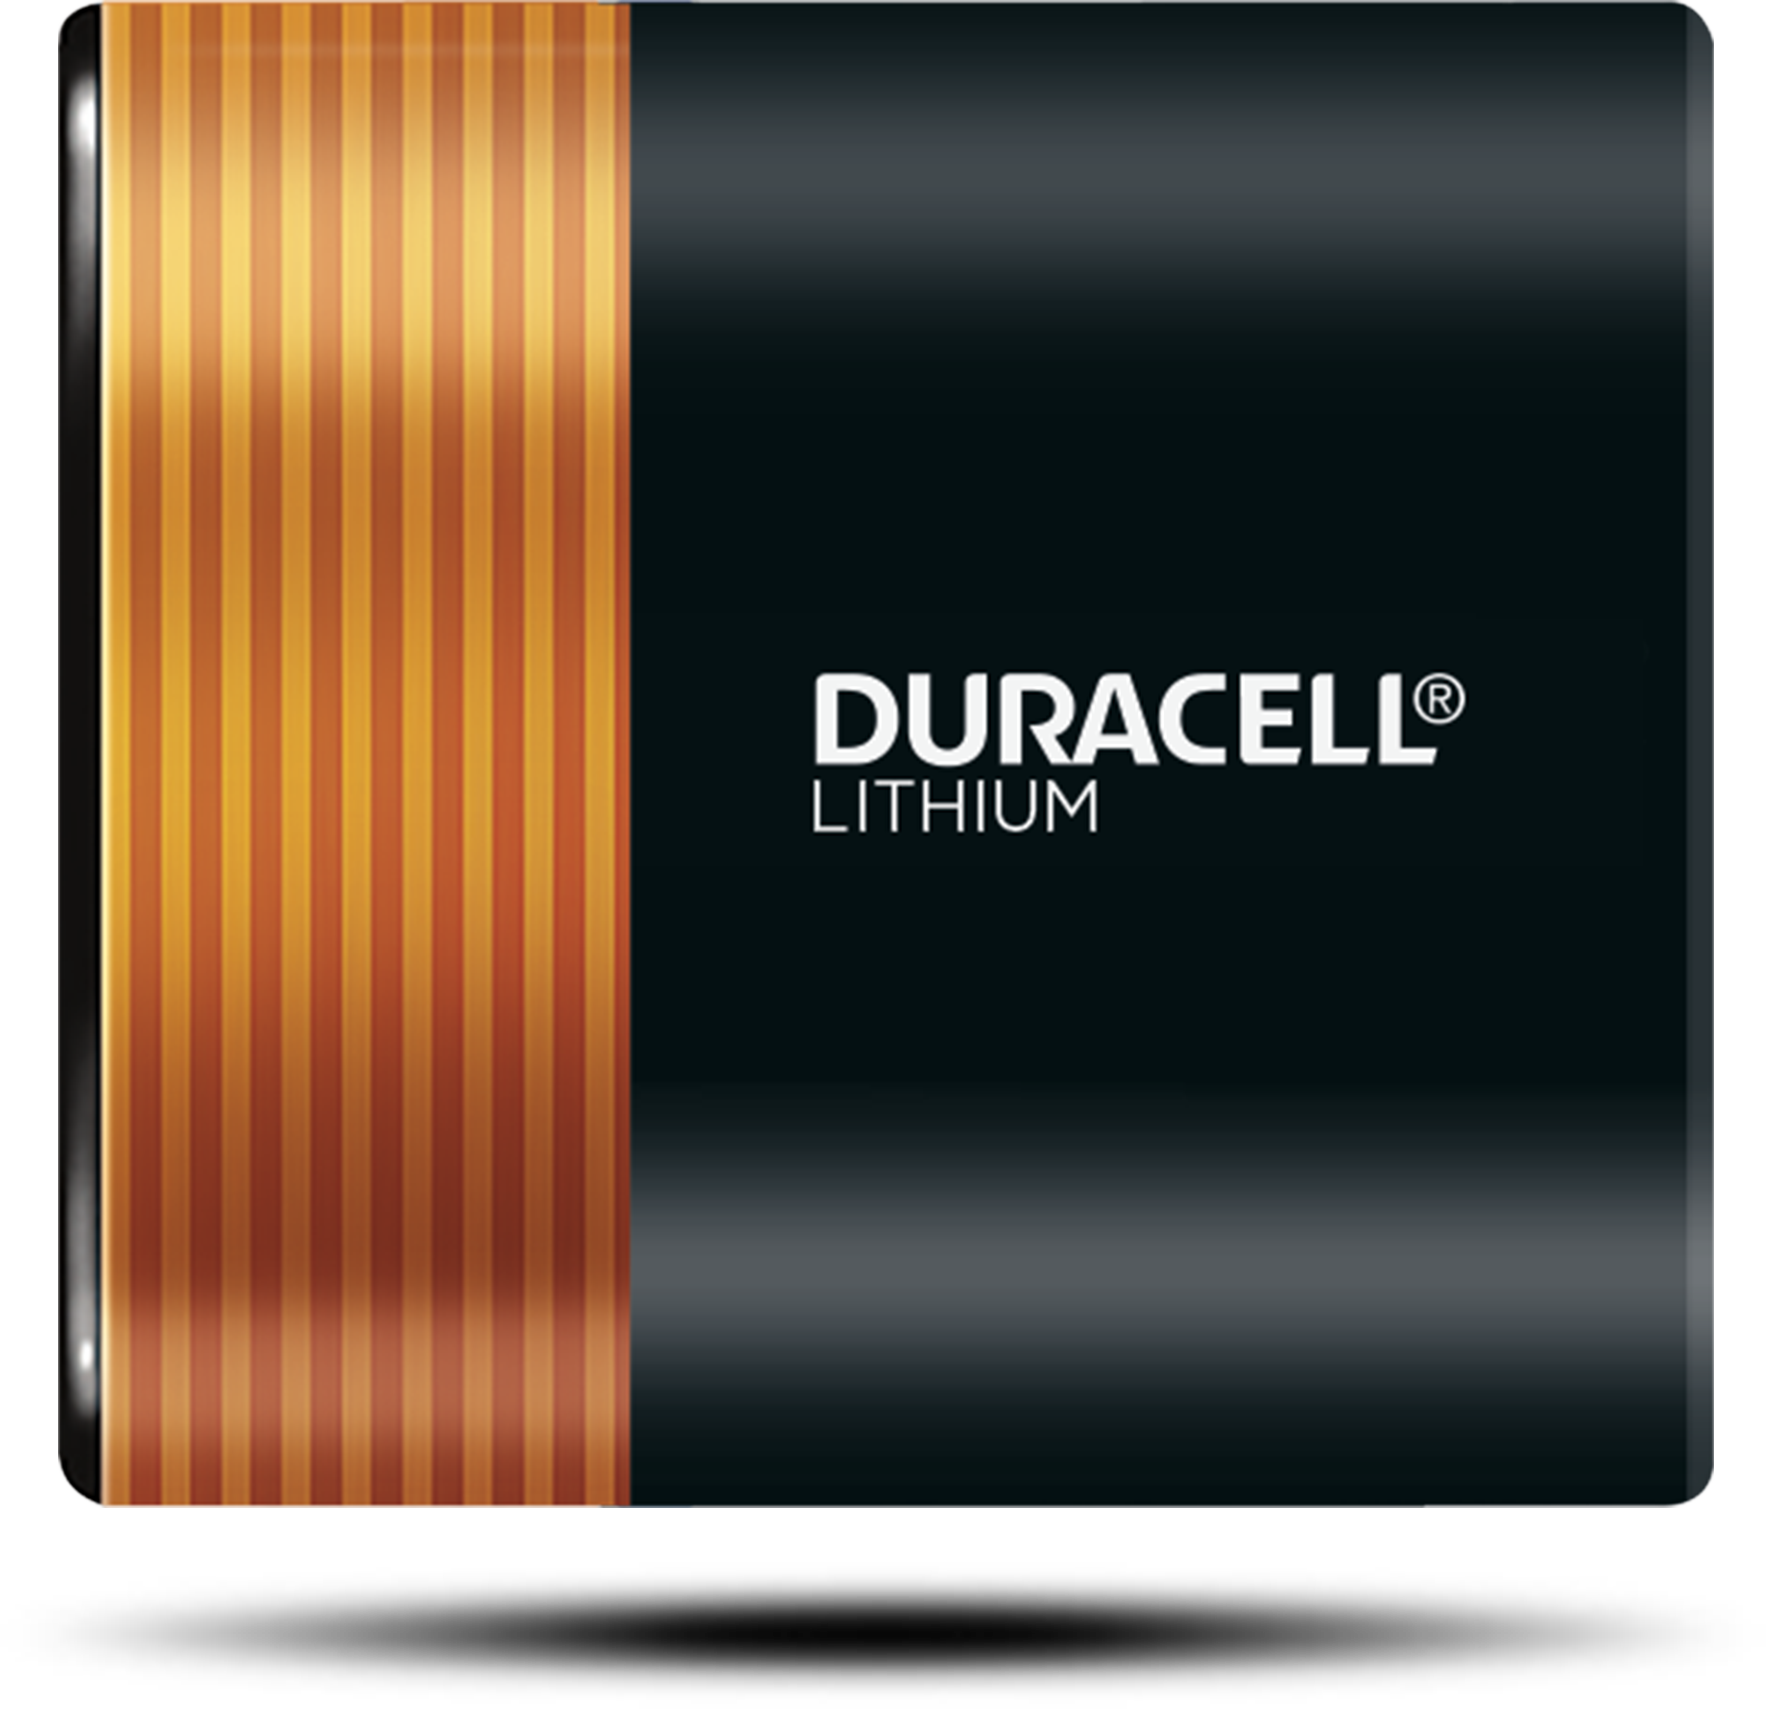  Duracell CR123A 3V Lithium Battery, 6 Count Pack, 123